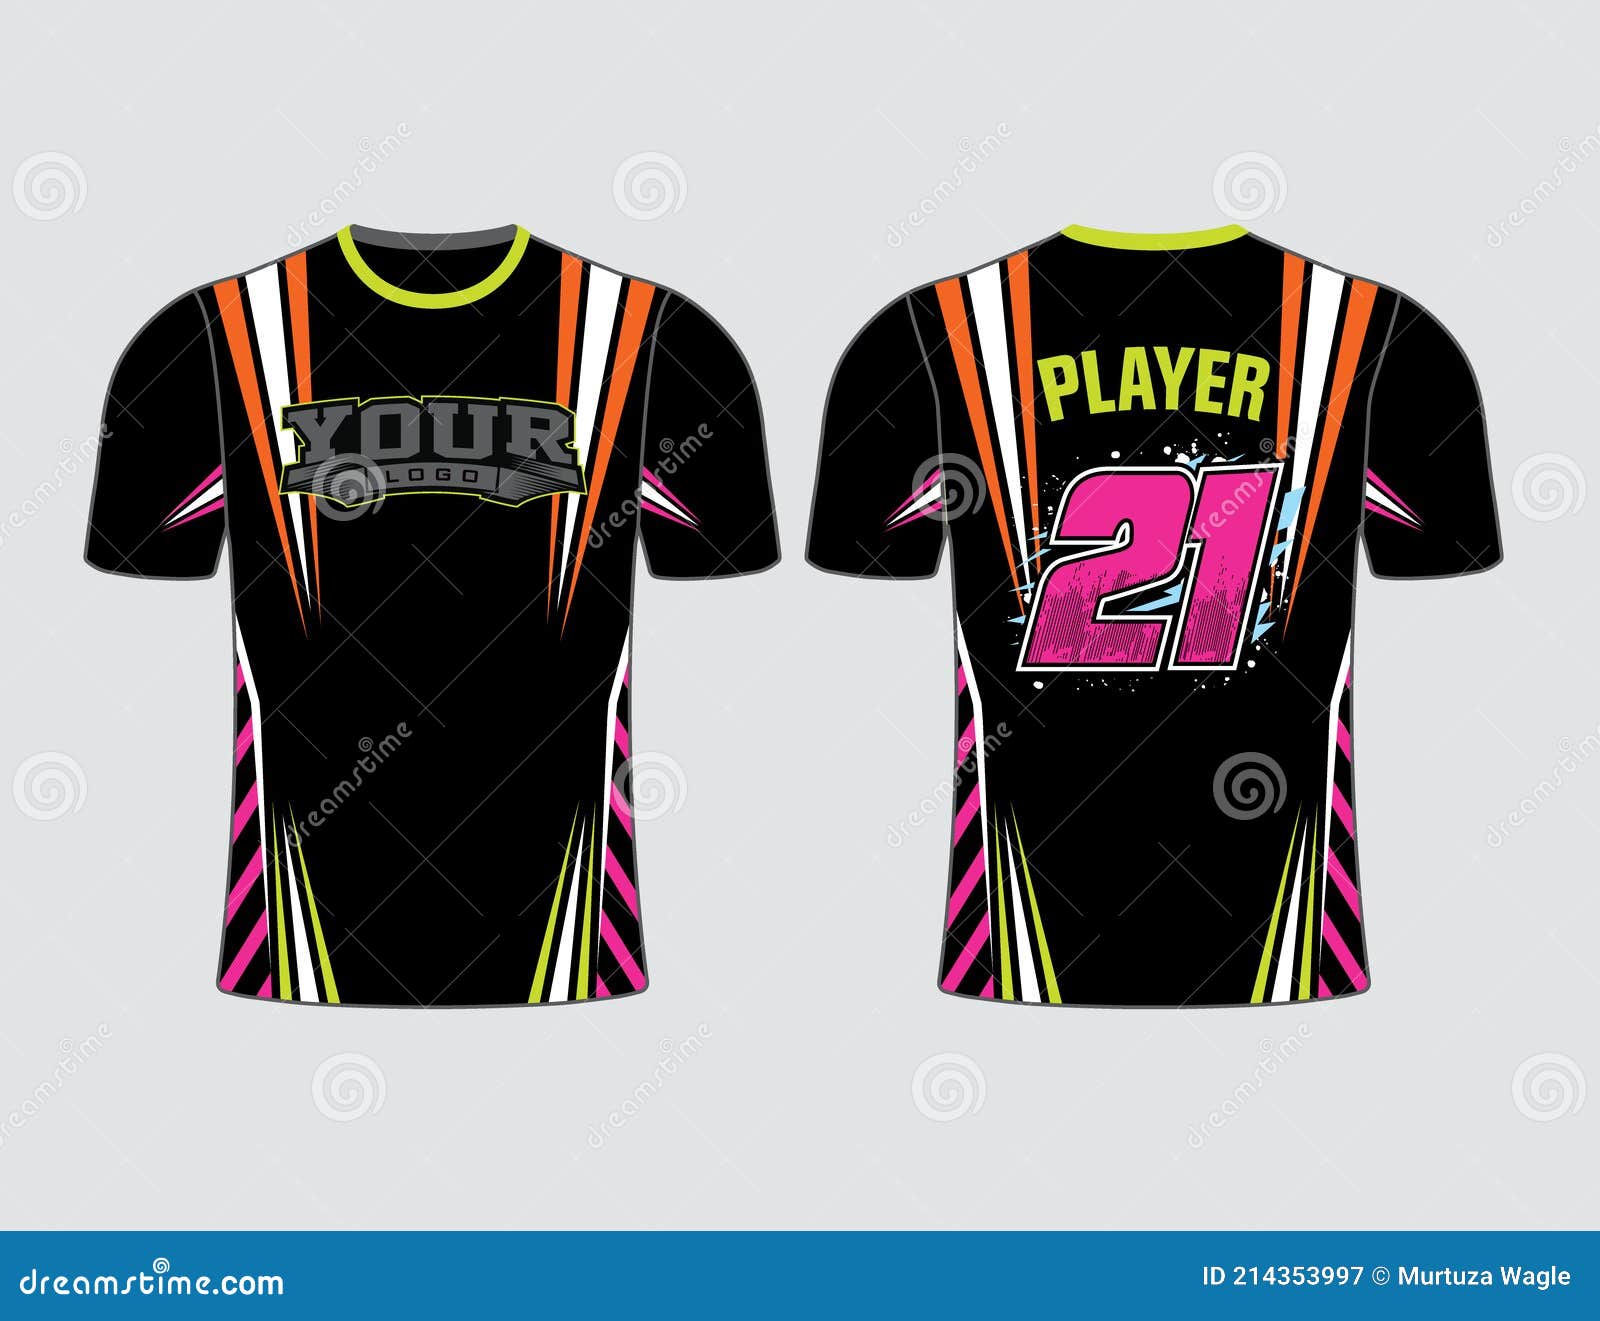 All Sports Player Jersey Design with Elegant Edgy and Wild Look Stock ...